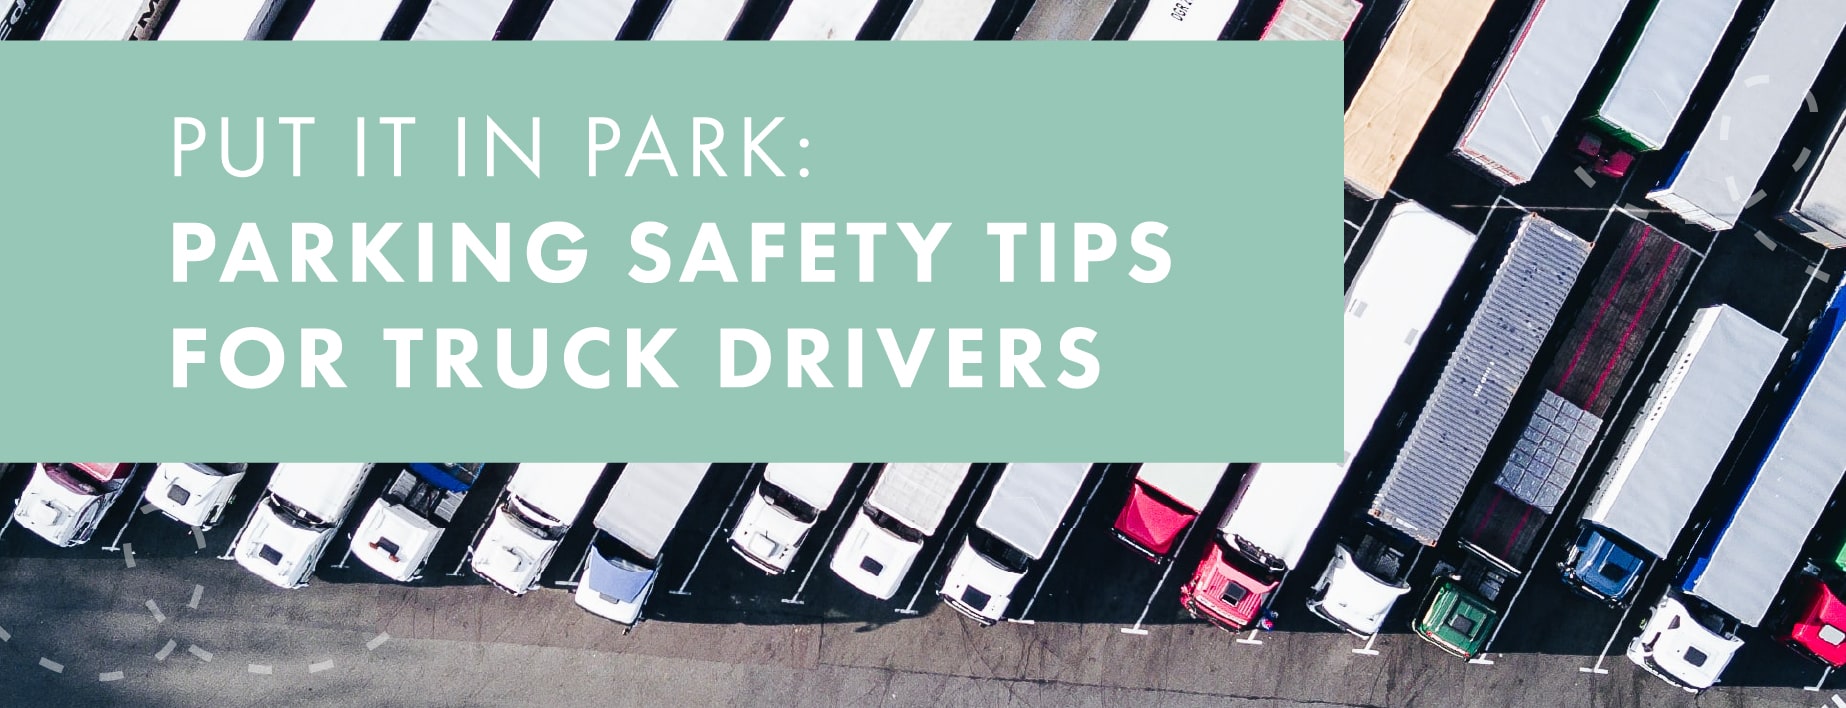 Put it in Park: Parking Safety Tips for Truck Drivers